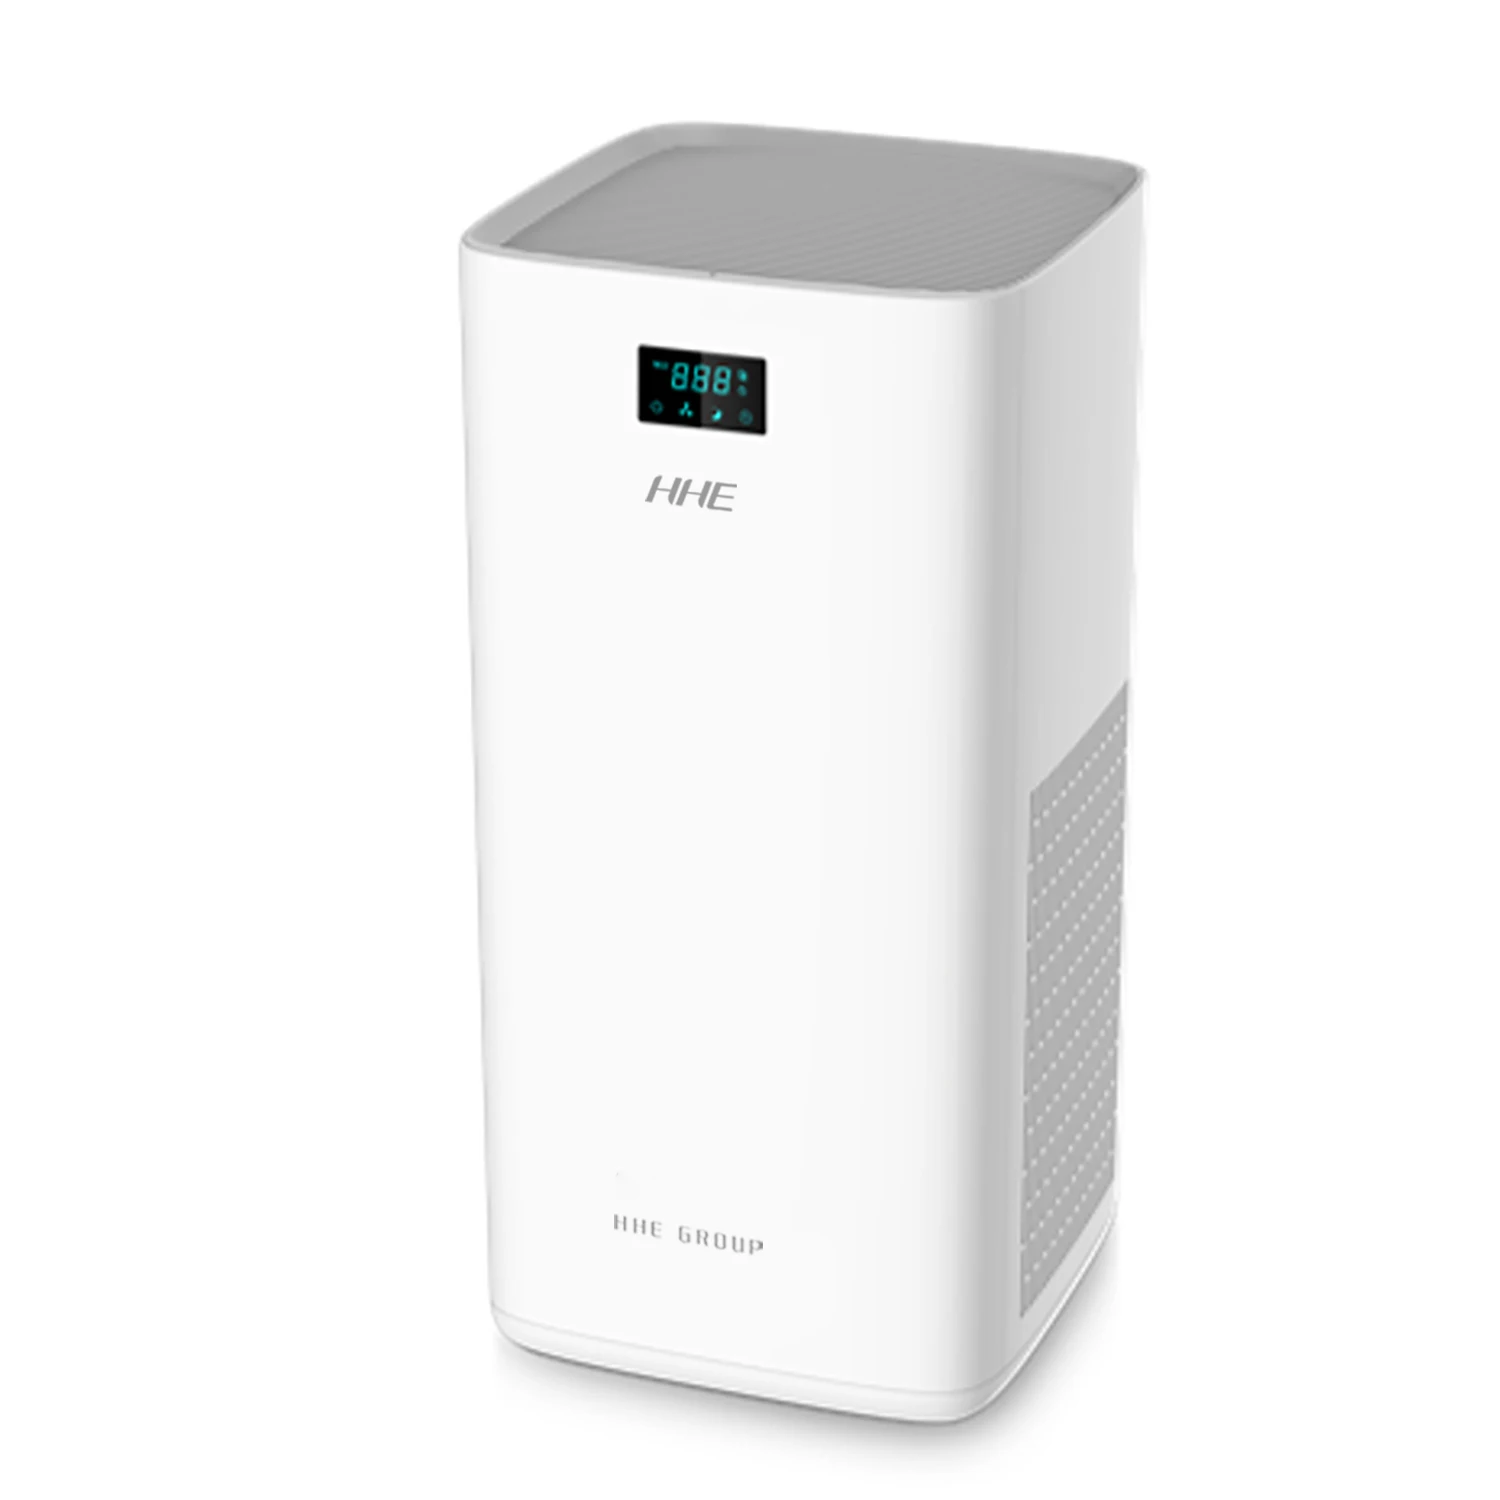 New ArrivalThree Stage Purification System Home Air Cleaning Intelligent Air Purifiers